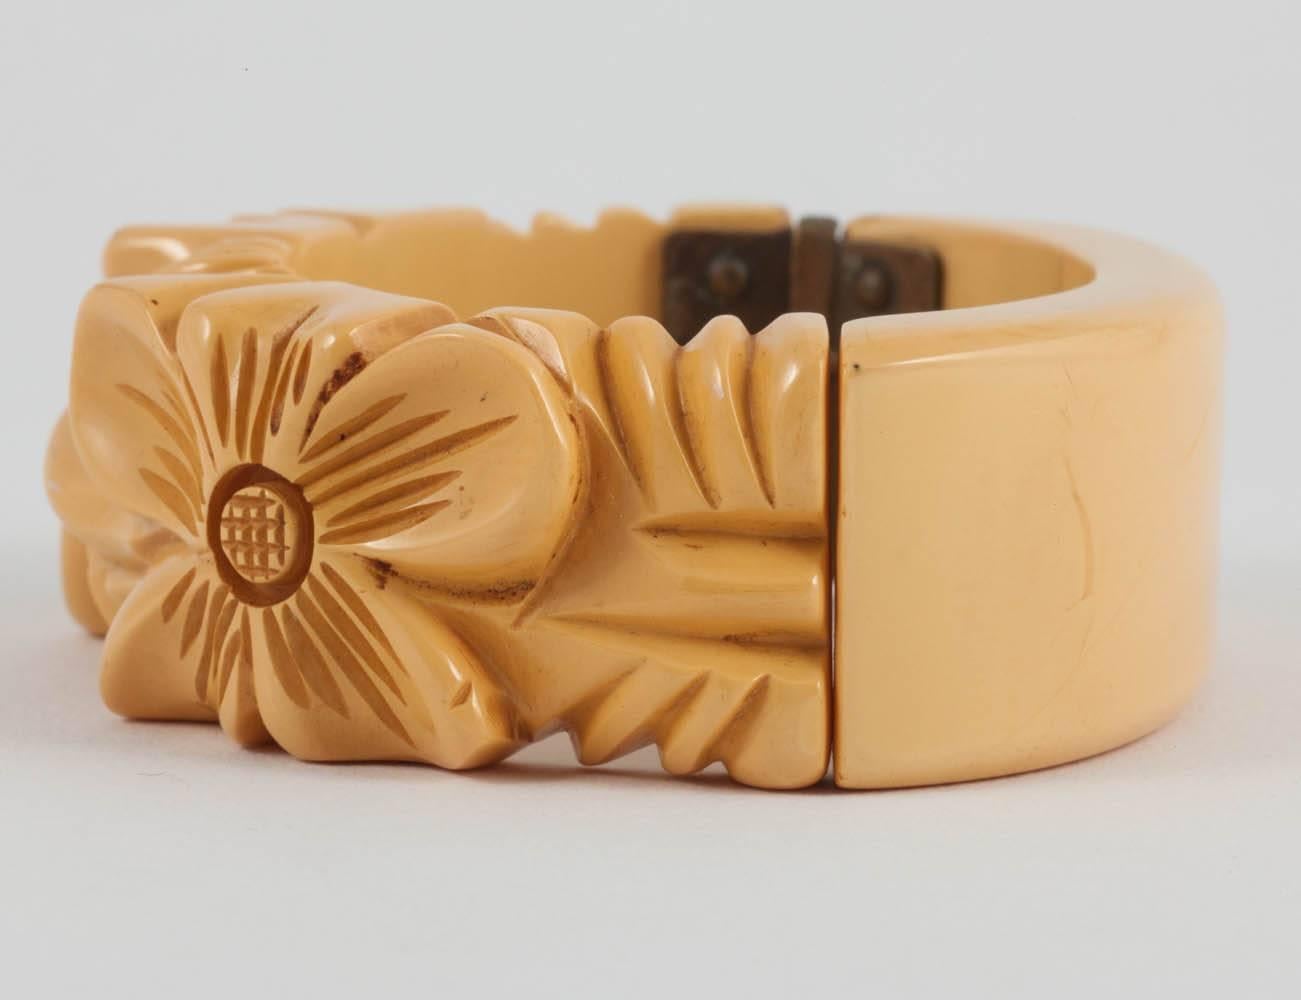 A beautiful carved bakelite bracelet from the 1930s, in a warm buttery cream colour.
Two other similar bracelets are also listed this week, in maroon and a deep green, more wintery colours - they would look lovely all worn together, in the